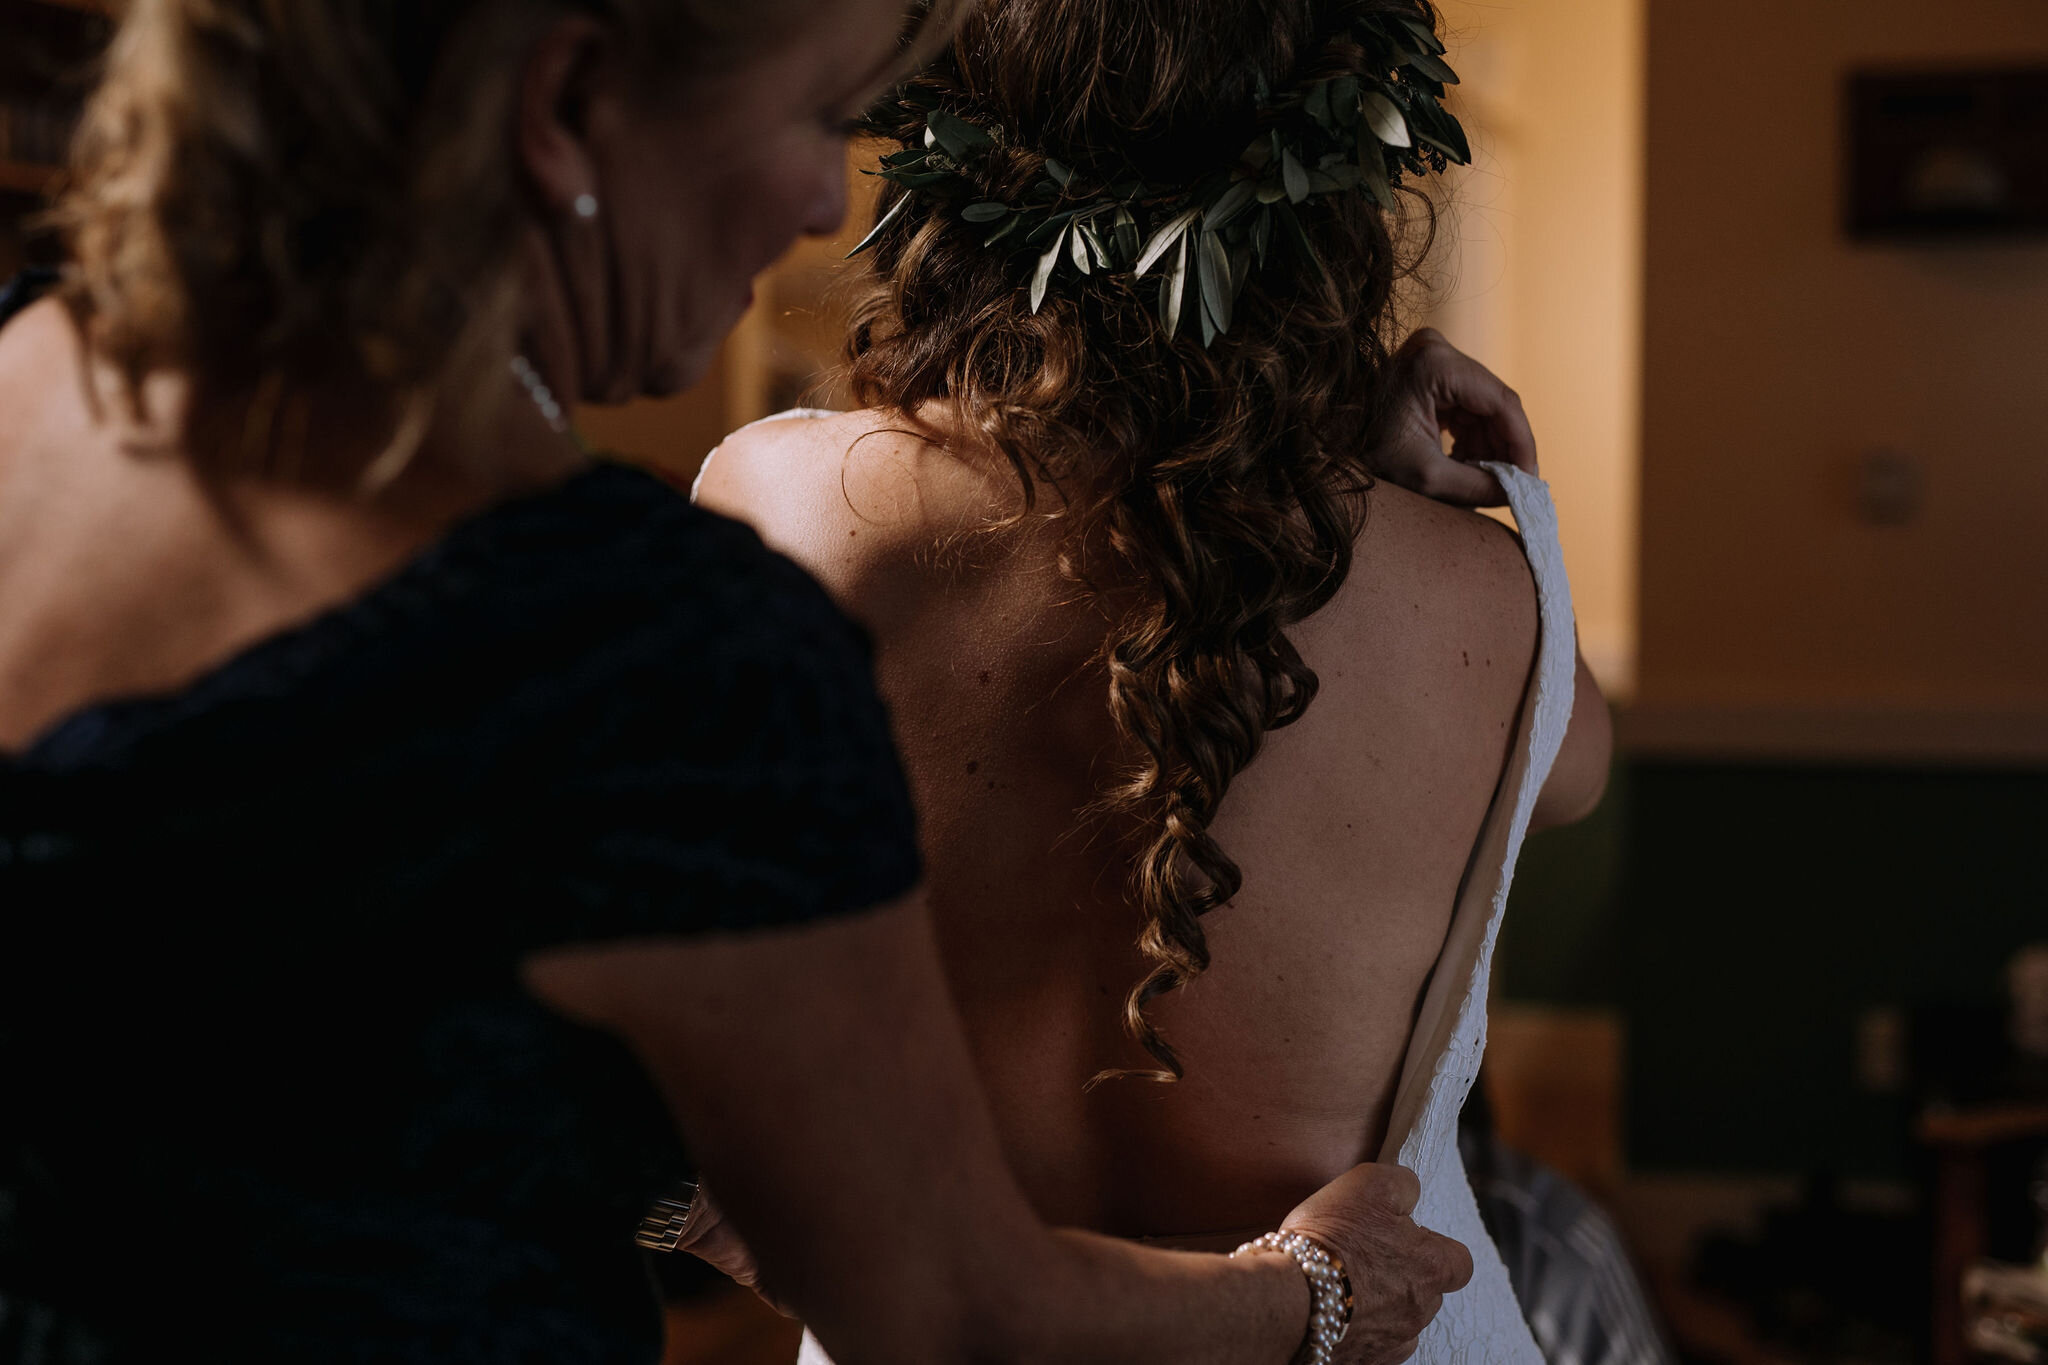 pacific-engagements-lake-crescent-lodge-wedding-bride-getting-ready-photos-bride-putting-on-dress-photos